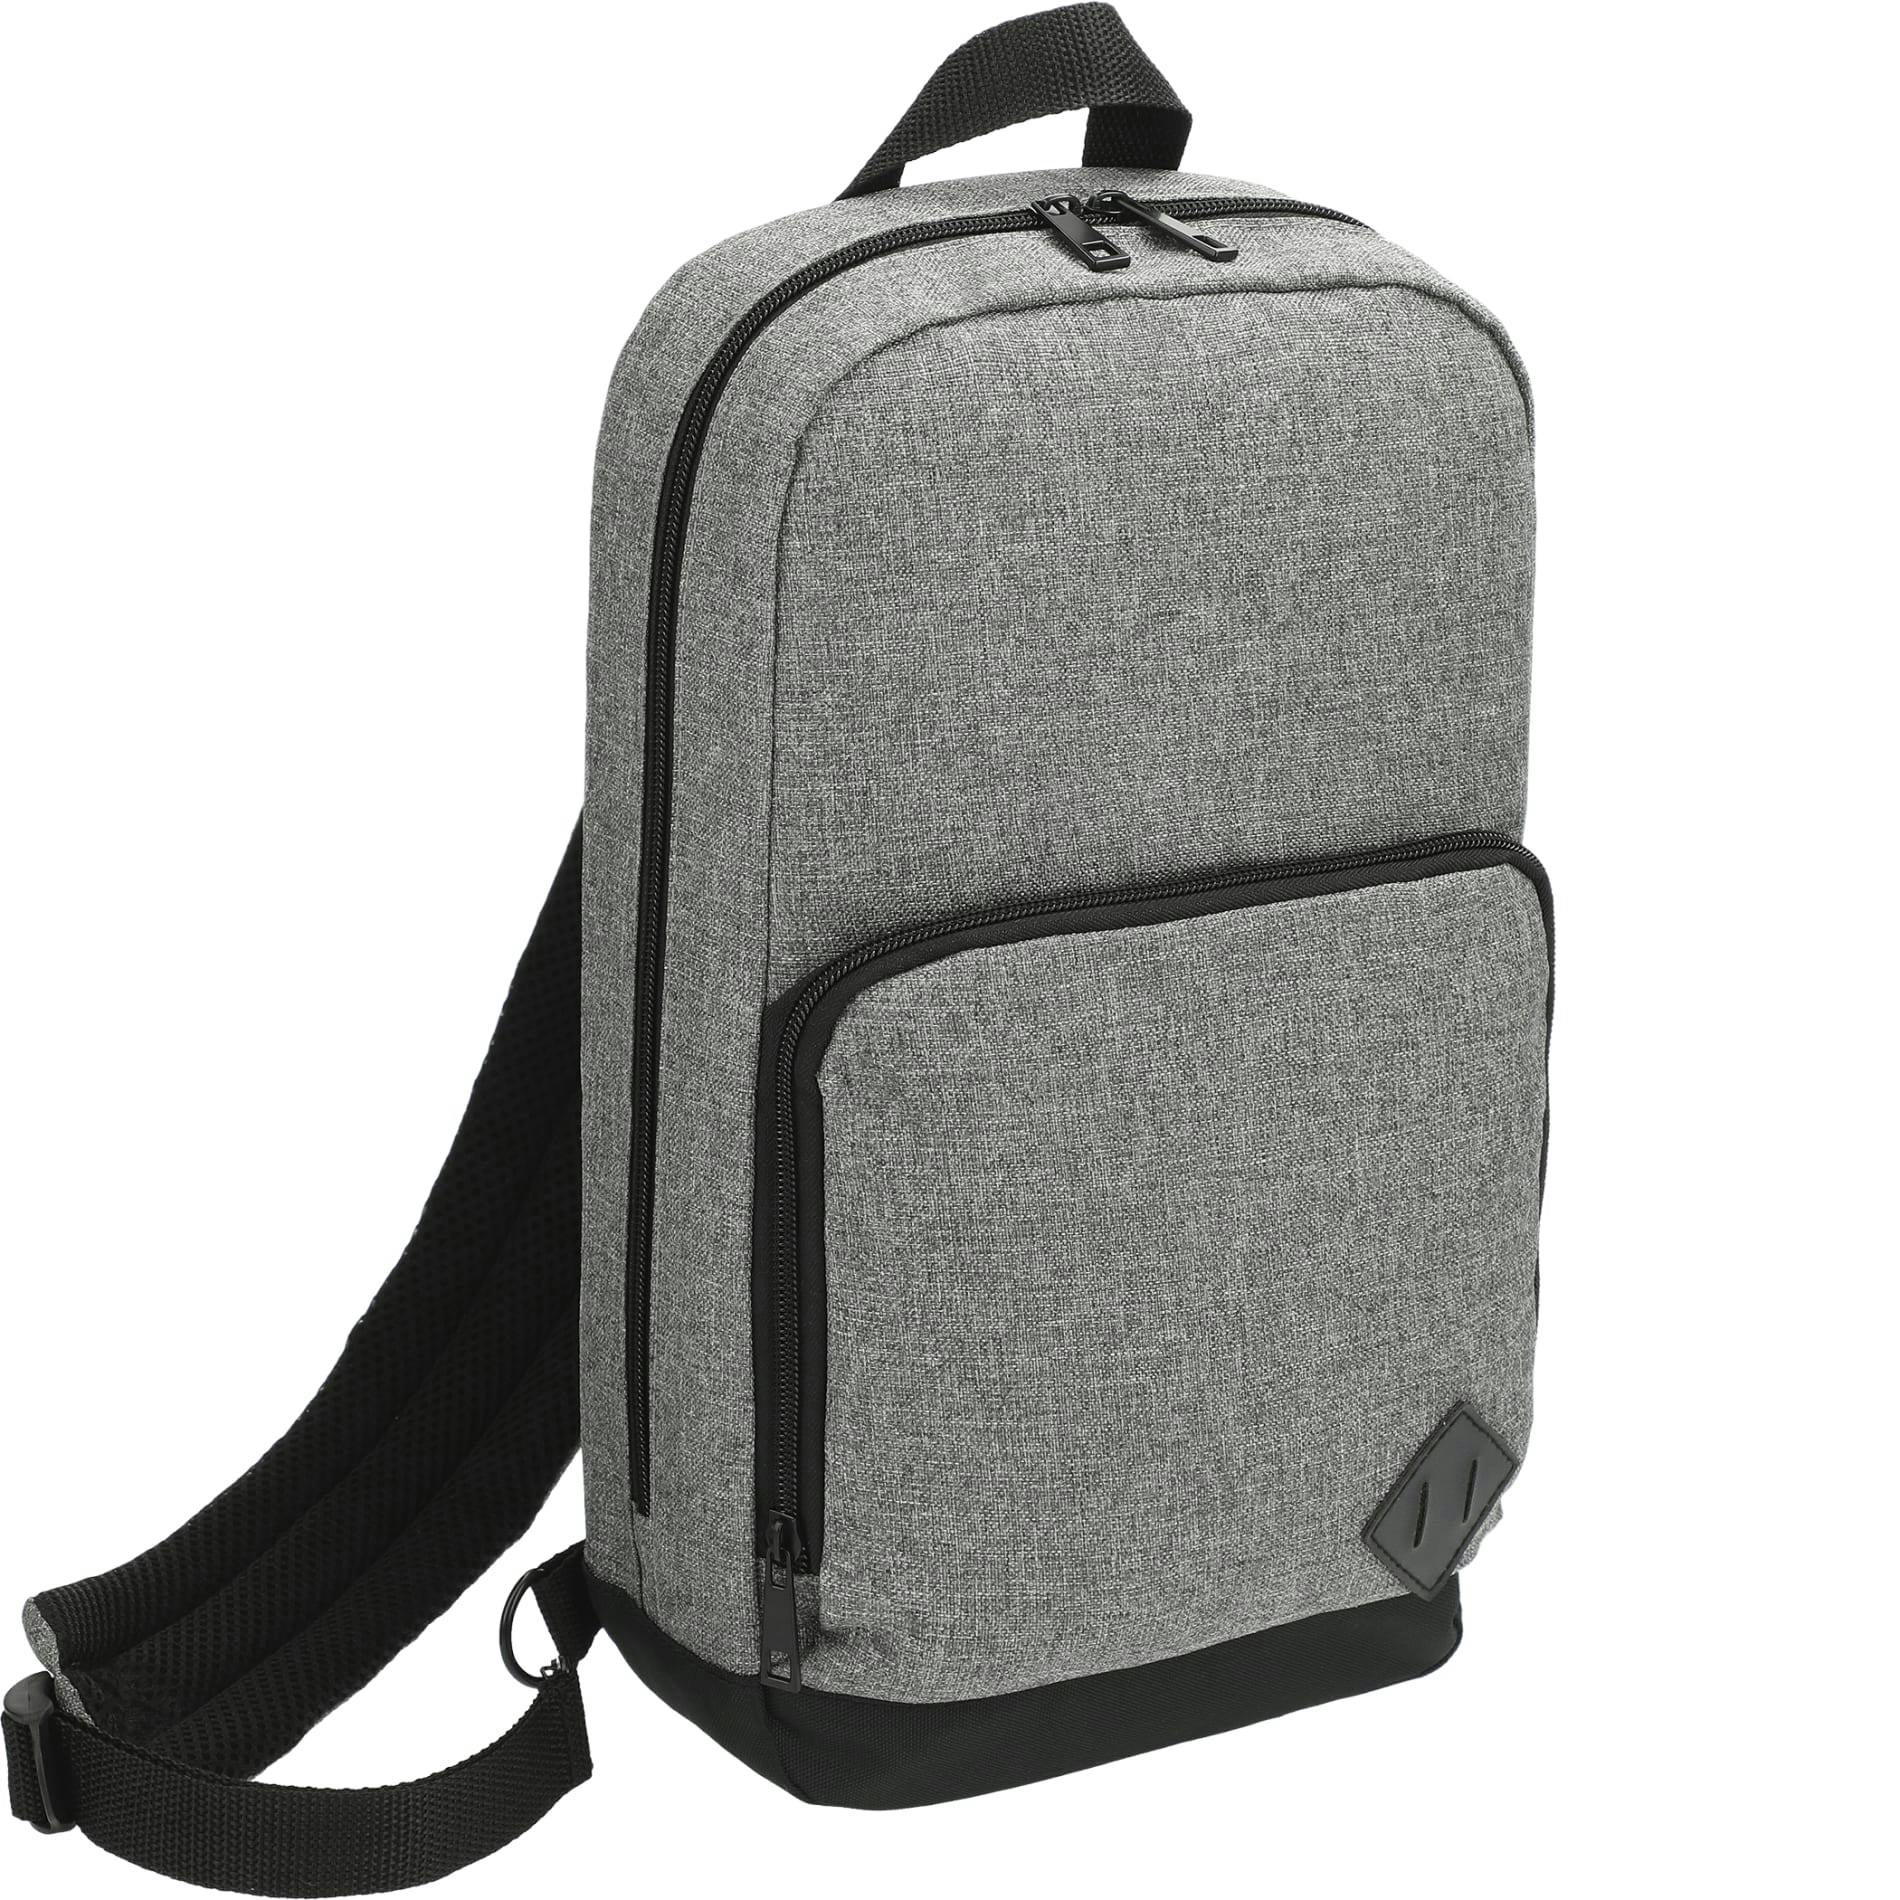 Graphite Deluxe Recycled Sling Backpack - additional Image 6